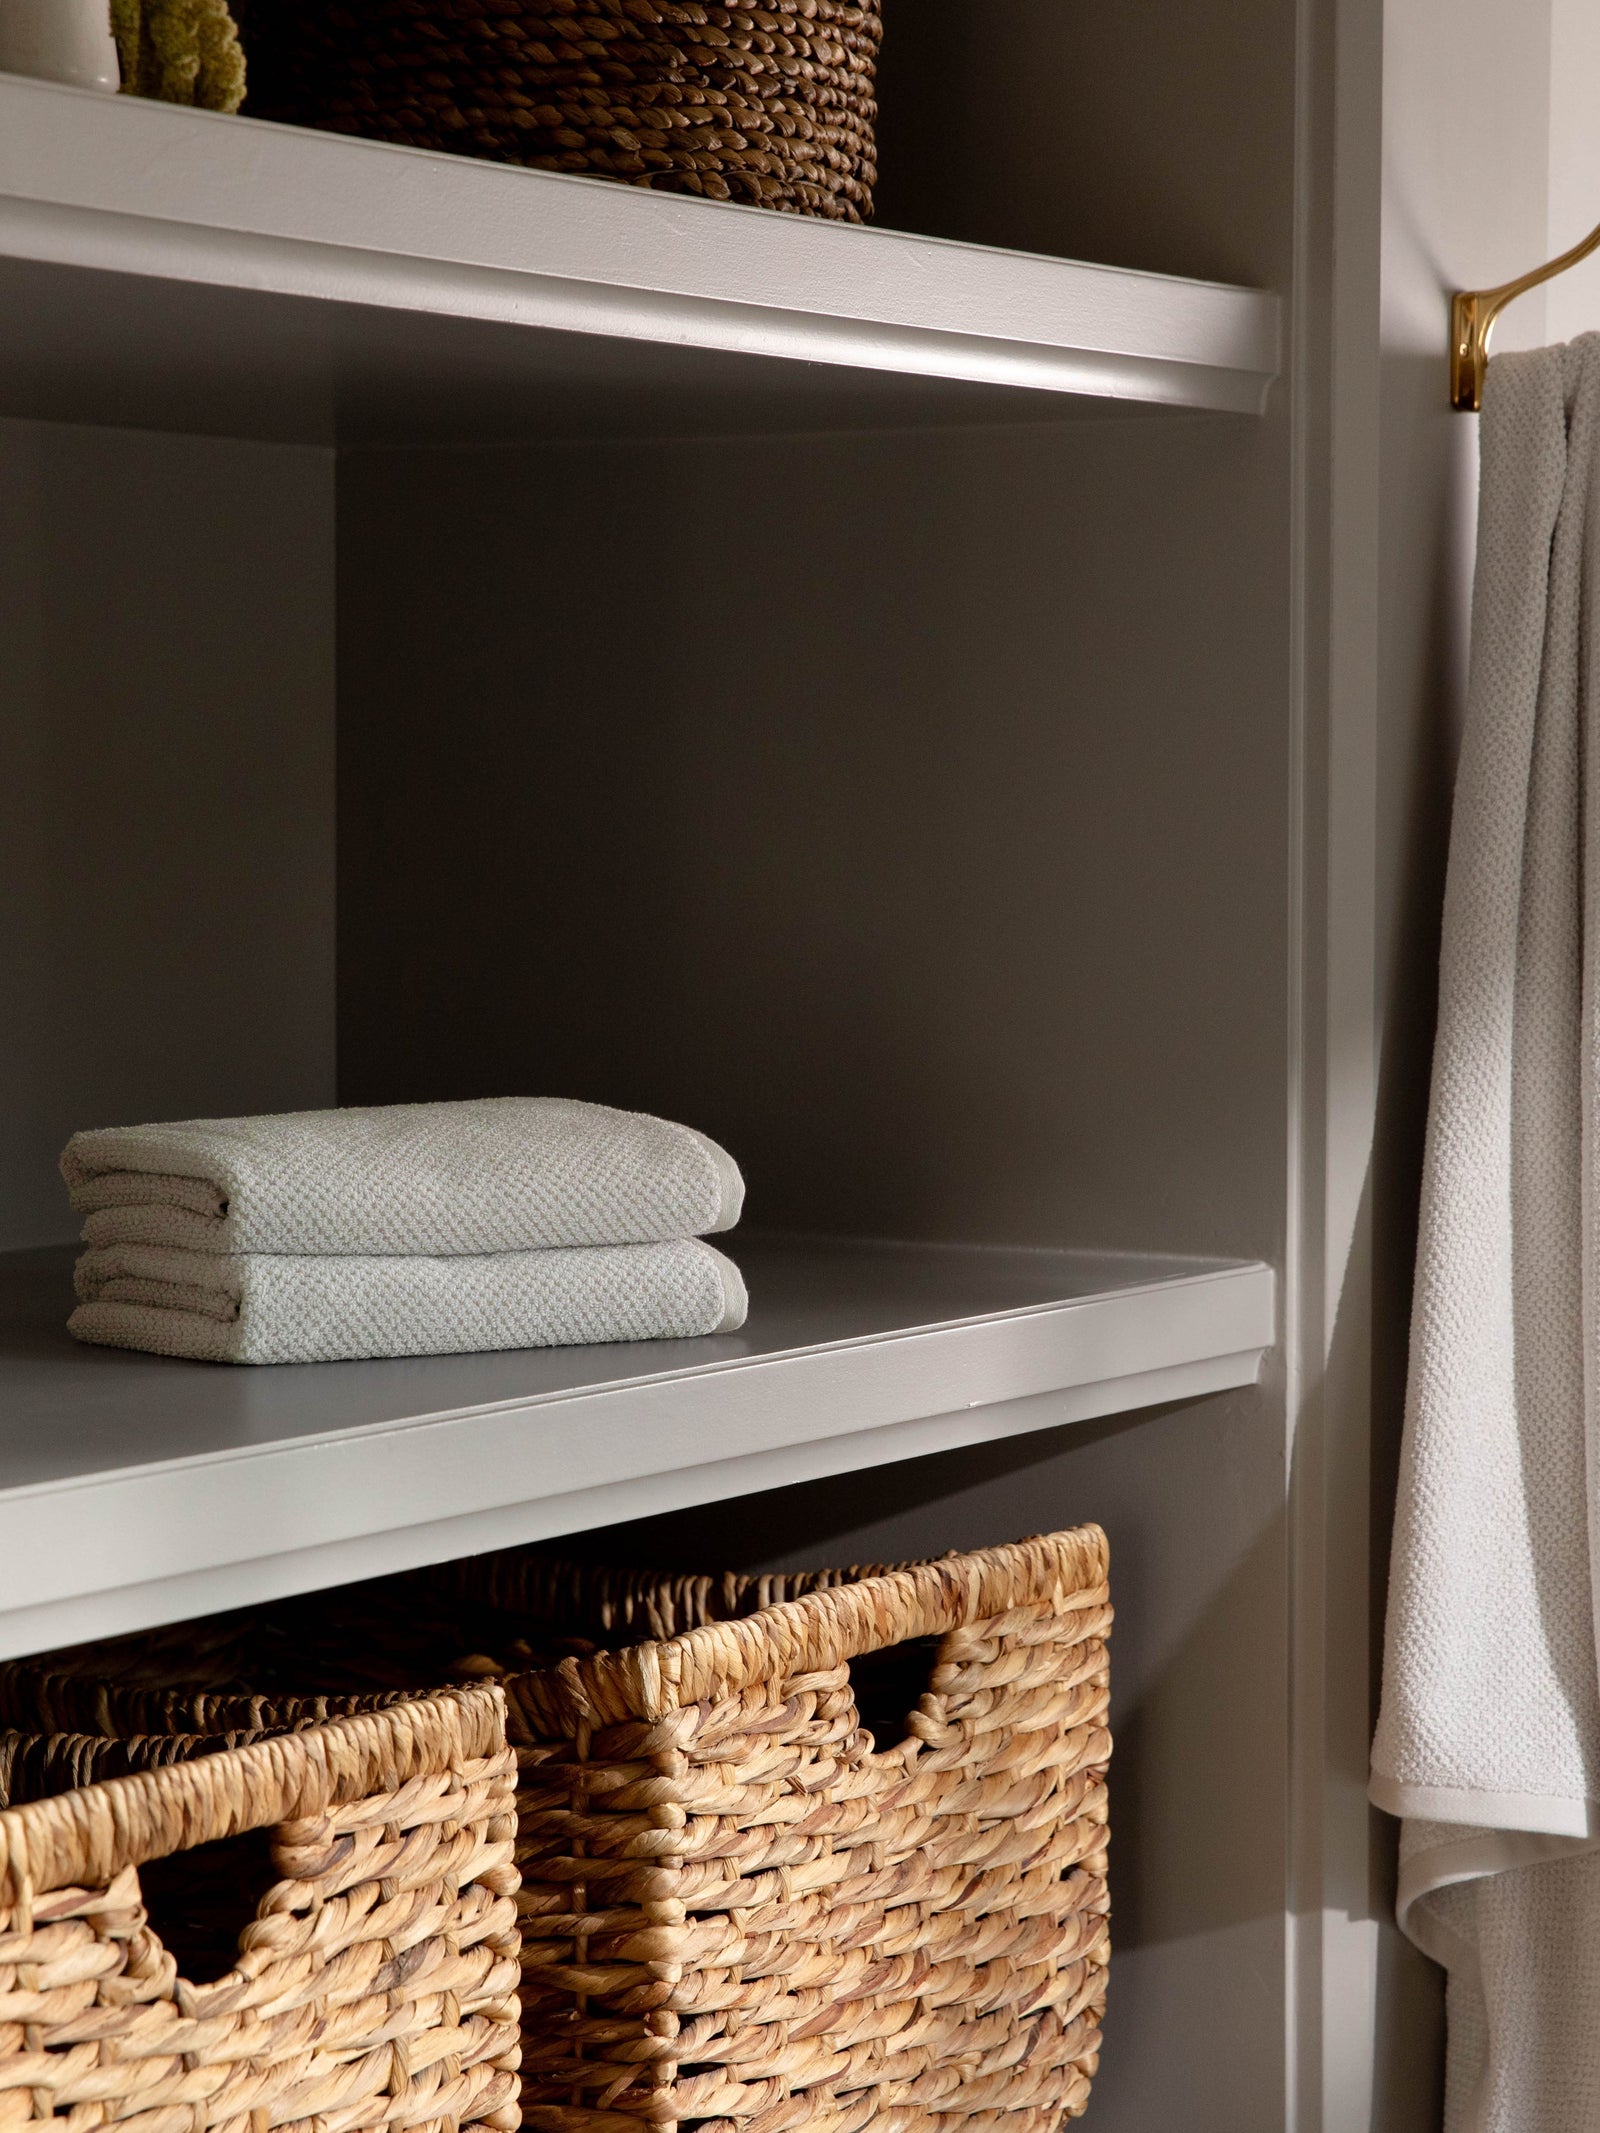 Nantucket Hand Towels in the color Heathered Light Grey. Photo of Nantucket Hand Towels taken with the hand towels resting on a shelf in a bathroom. 